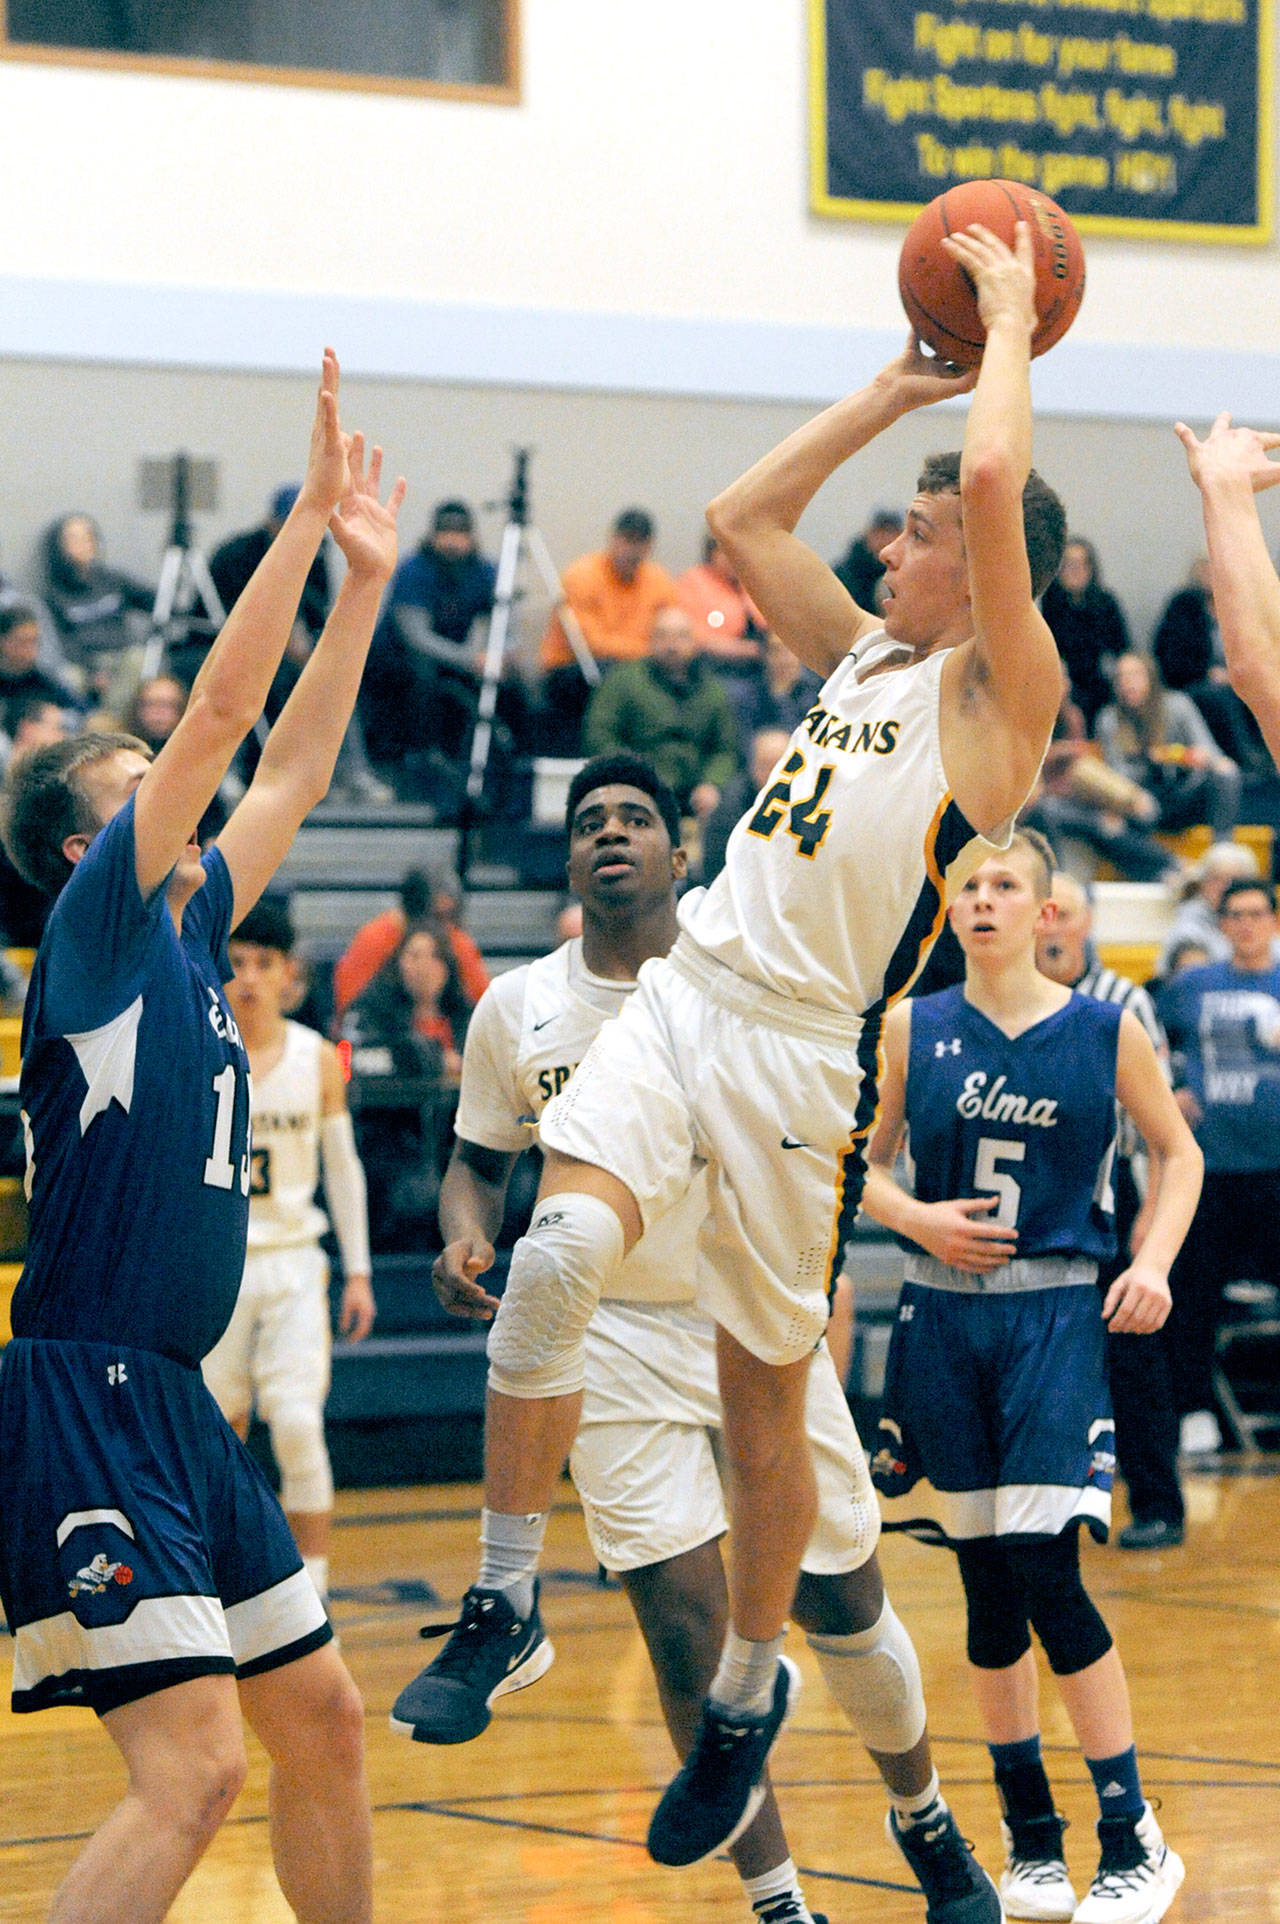 Lonnie Archibald/for Peninsula Daily News                                Forks’ Logan Olson shoots over an Elma defender Friday evening in Forks where the Eagles defeated the Spartans 49-42.